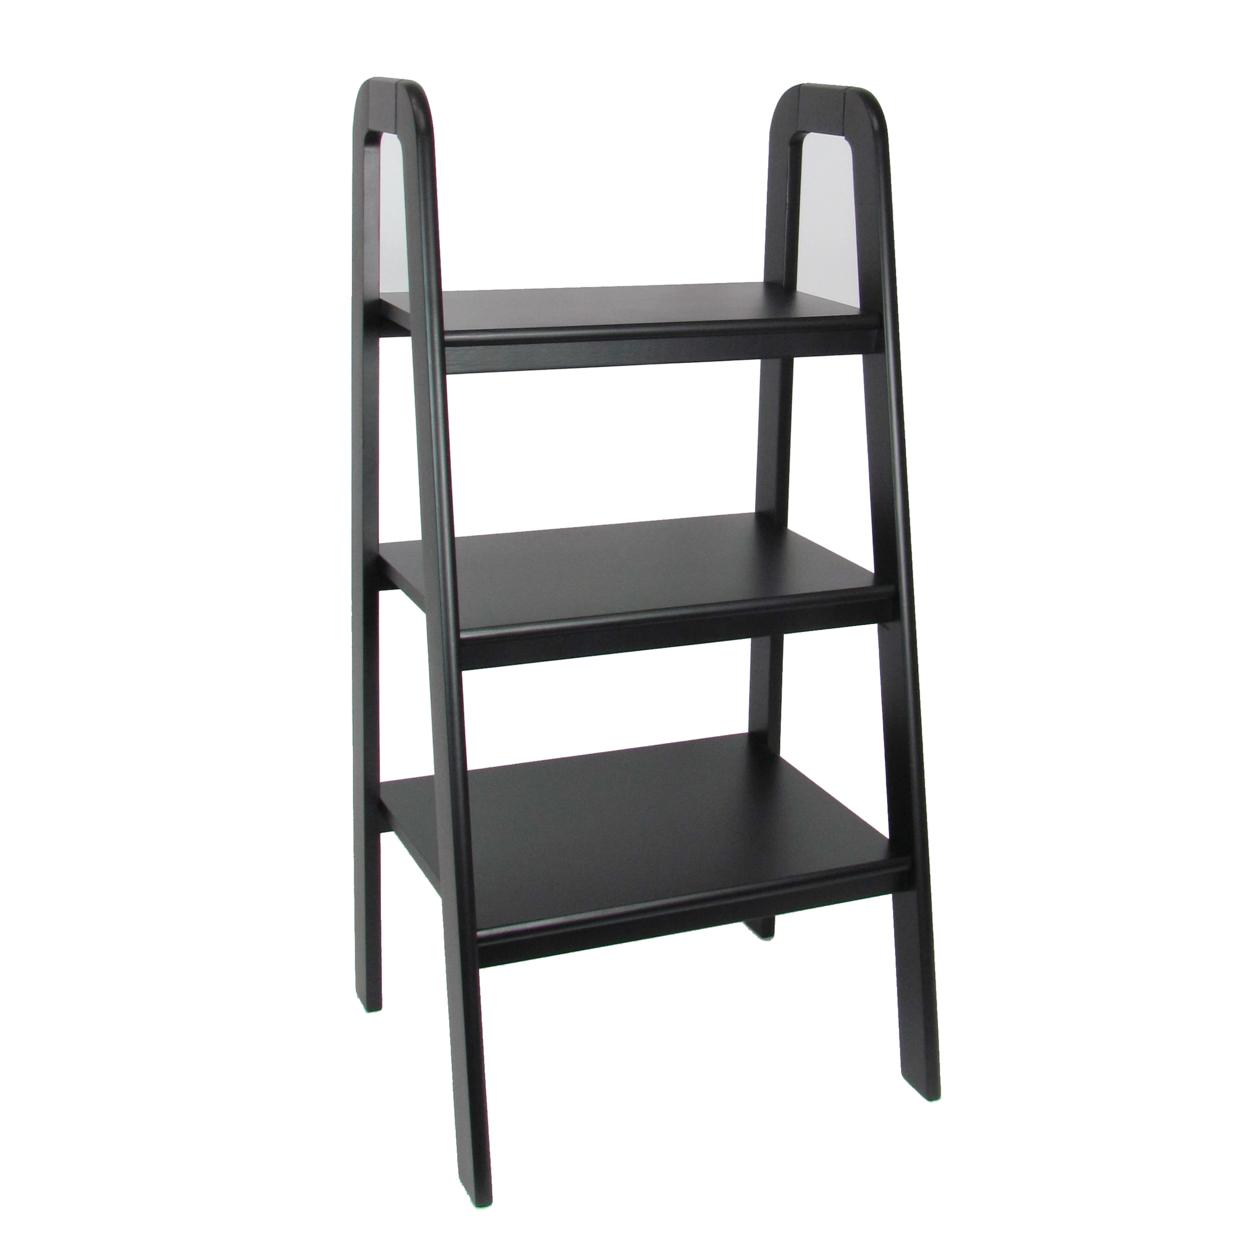 3 Tier Wooden Storage Ladder Stand With Open Back And Sides, Black- Saltoro Sherpi